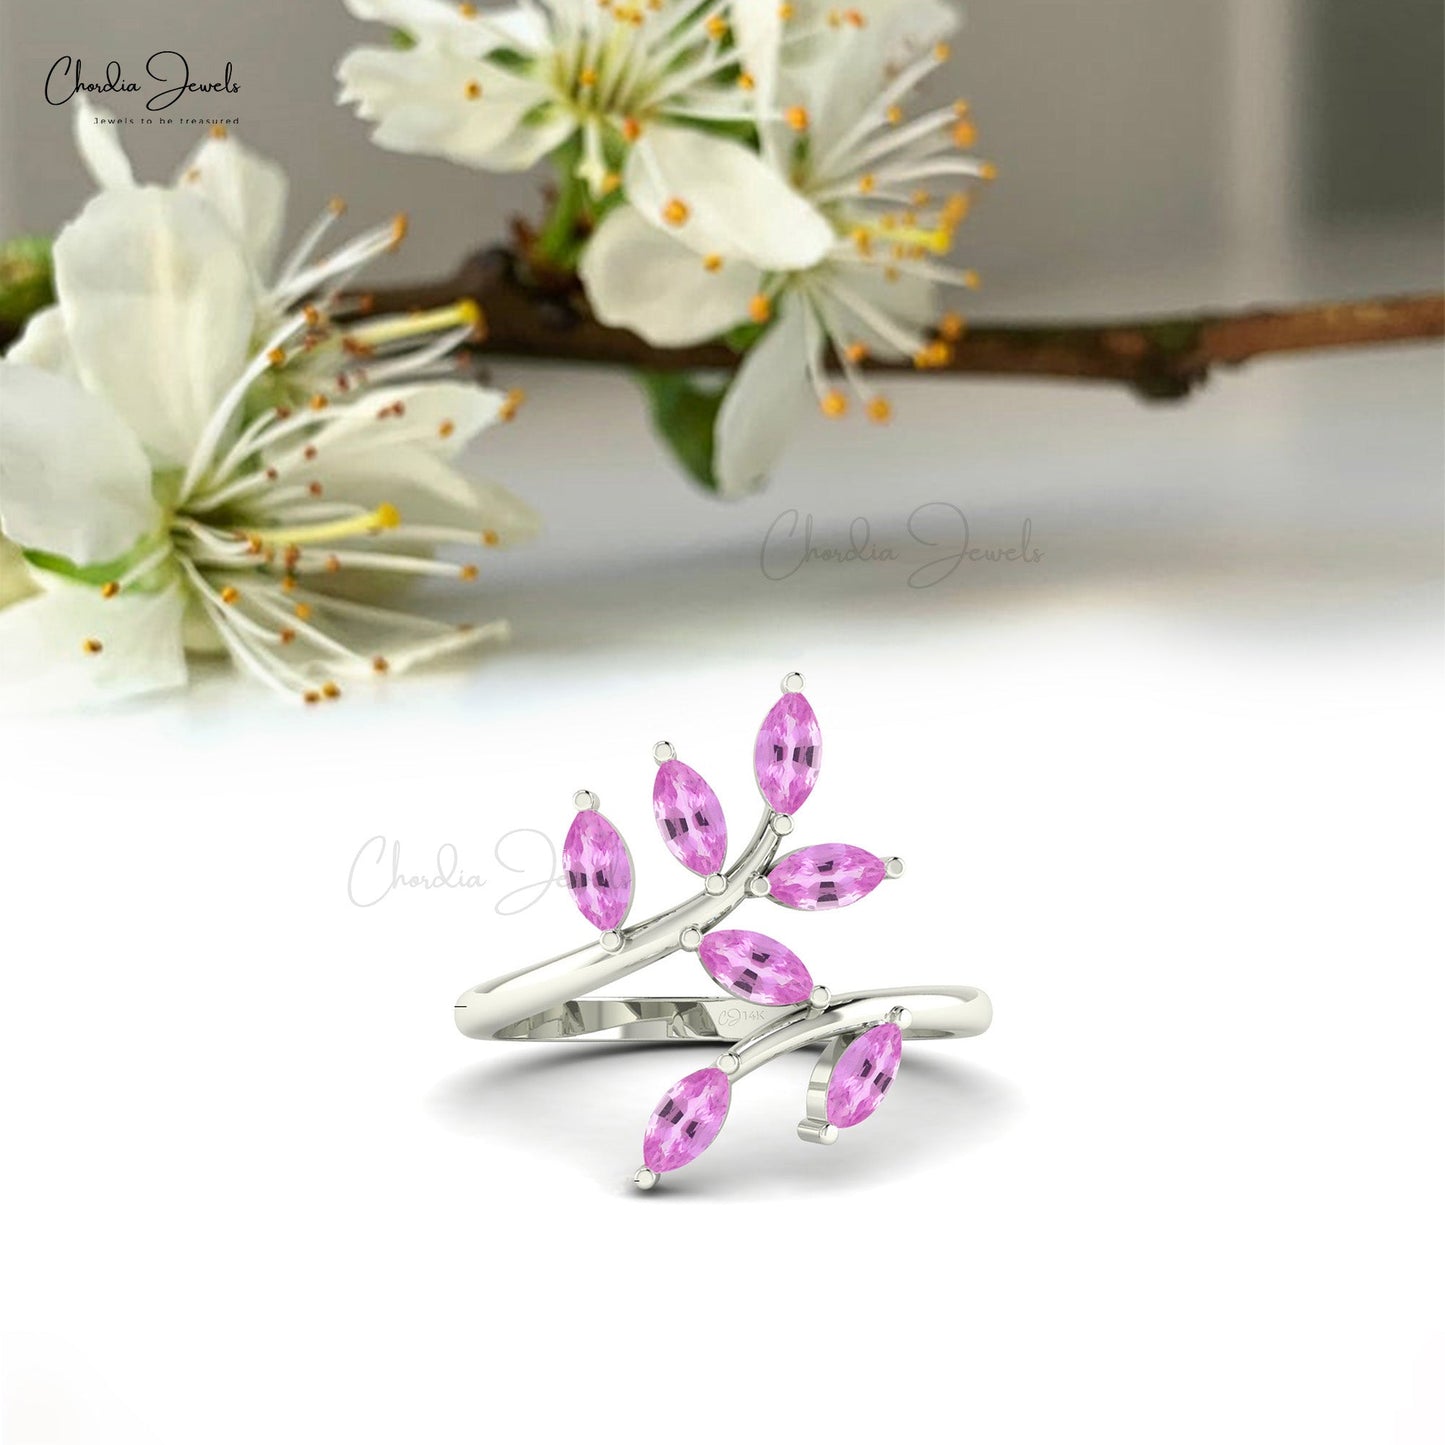 Load image into Gallery viewer, Nature-Inspired 14k Gold Pink Sapphire Leaf Ring
